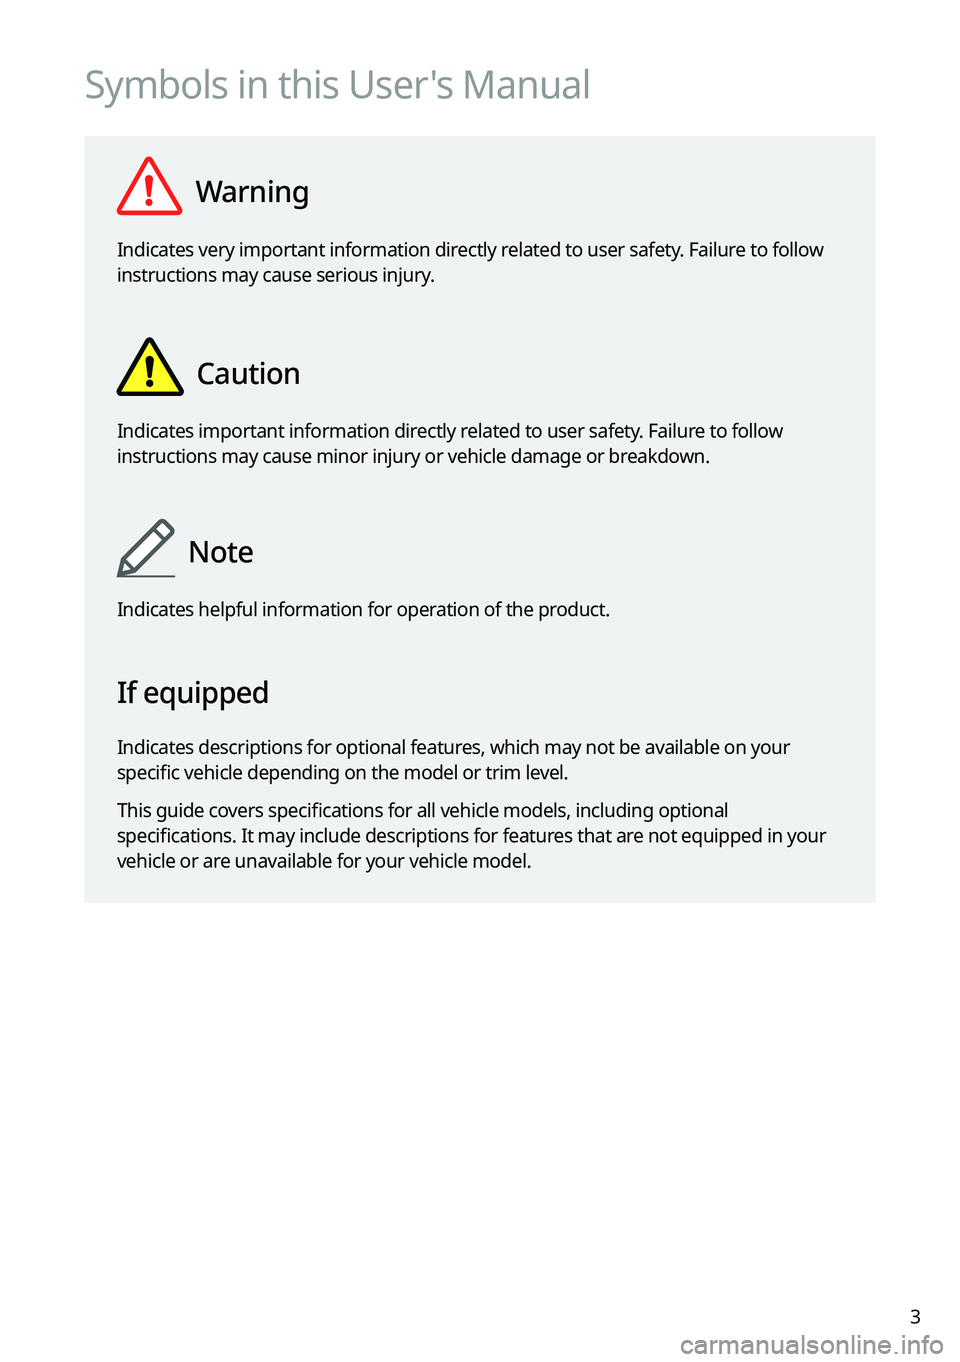 KIA SOUL 2023  Quick Reference Guide 3
Symbols in this User's Manual
  Warning
Indicates very important information directly related to user safety. Failure to follow 
instructions may cause serious injury.
  Caution
Indicates import